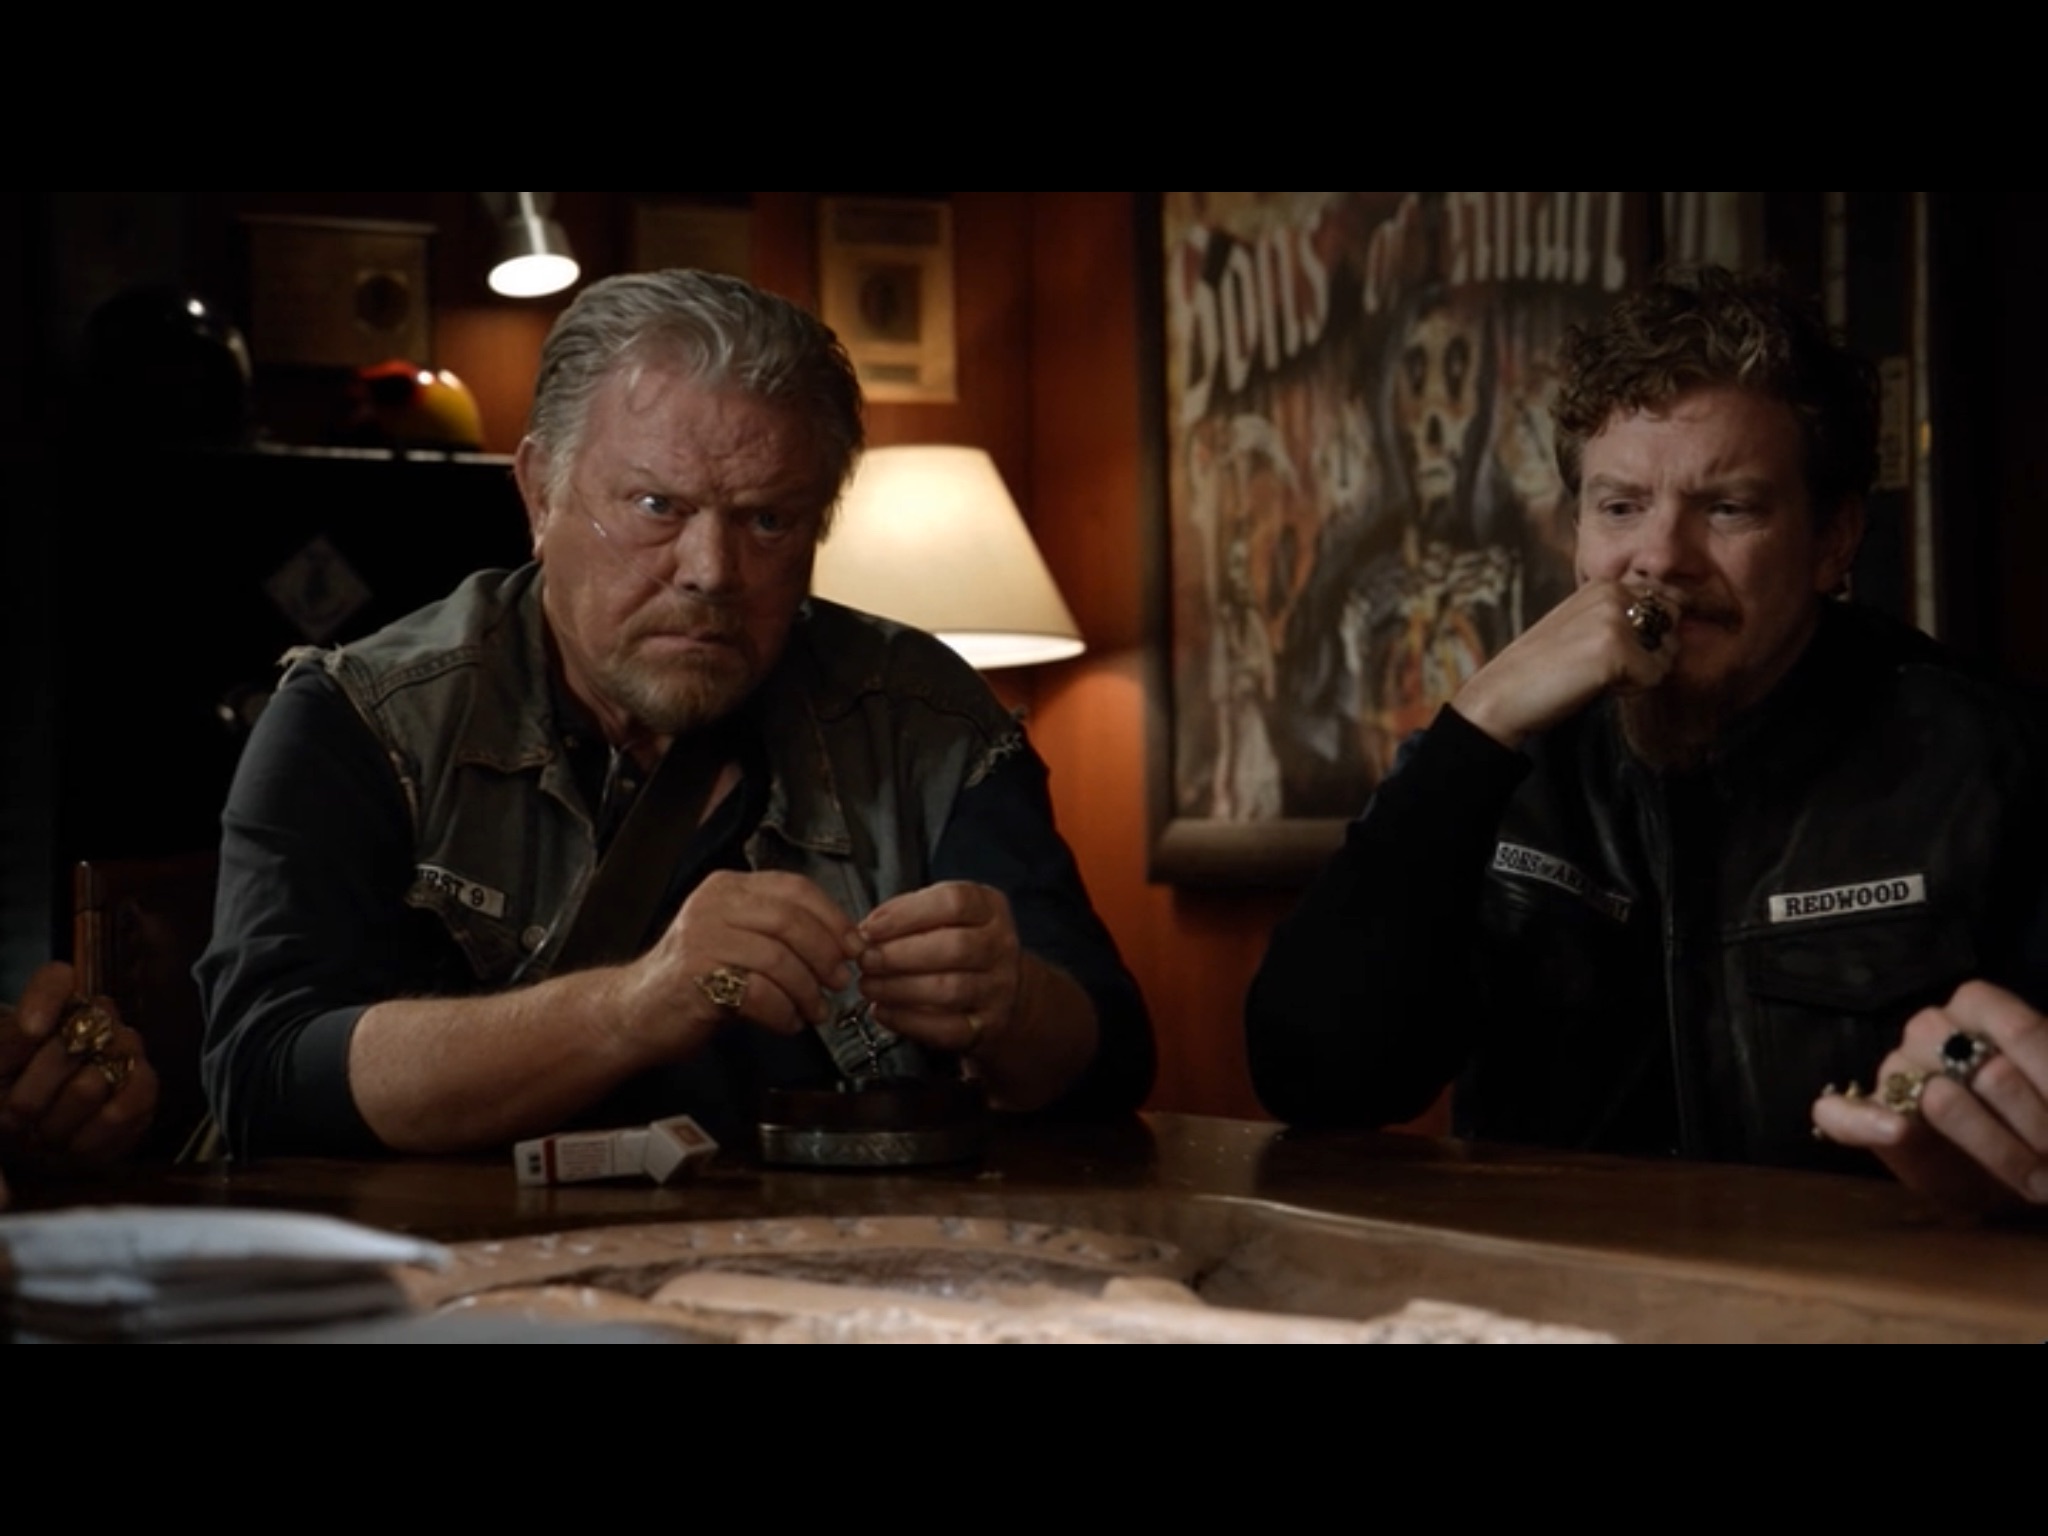 Frank Potter and William Lucking Sons of Anarchy Season 4